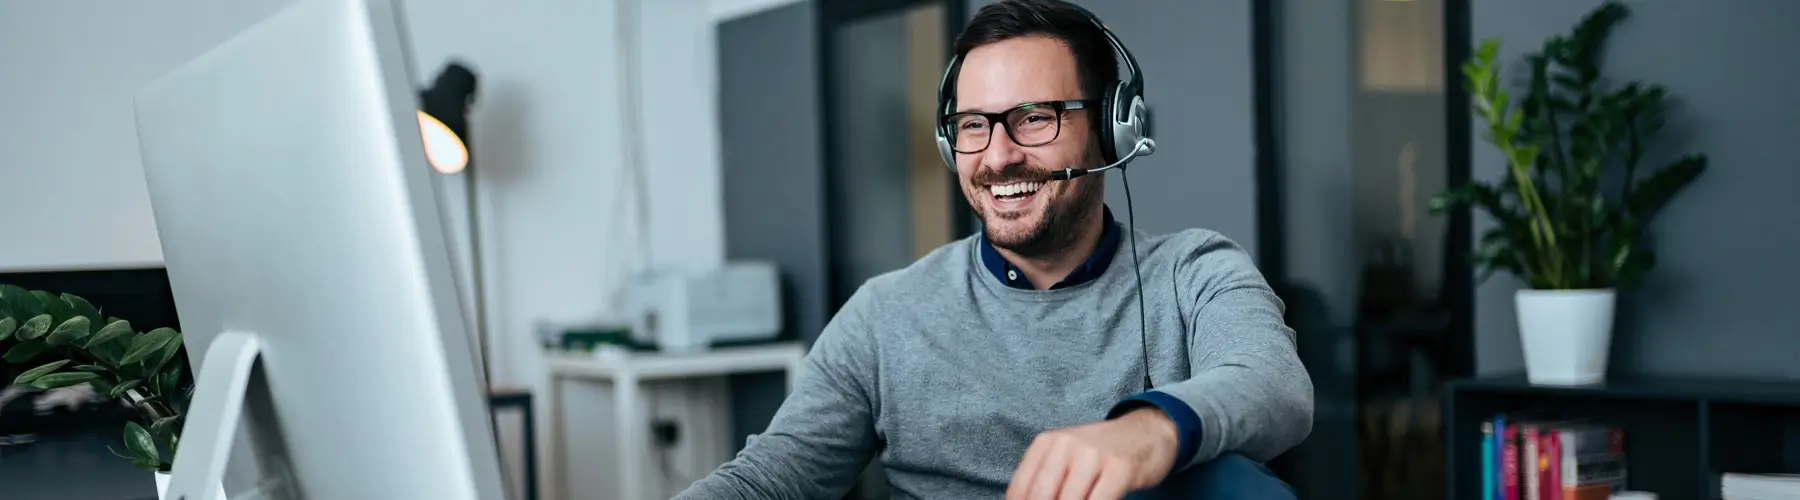 Friendly representative with headset works with customer over the phone